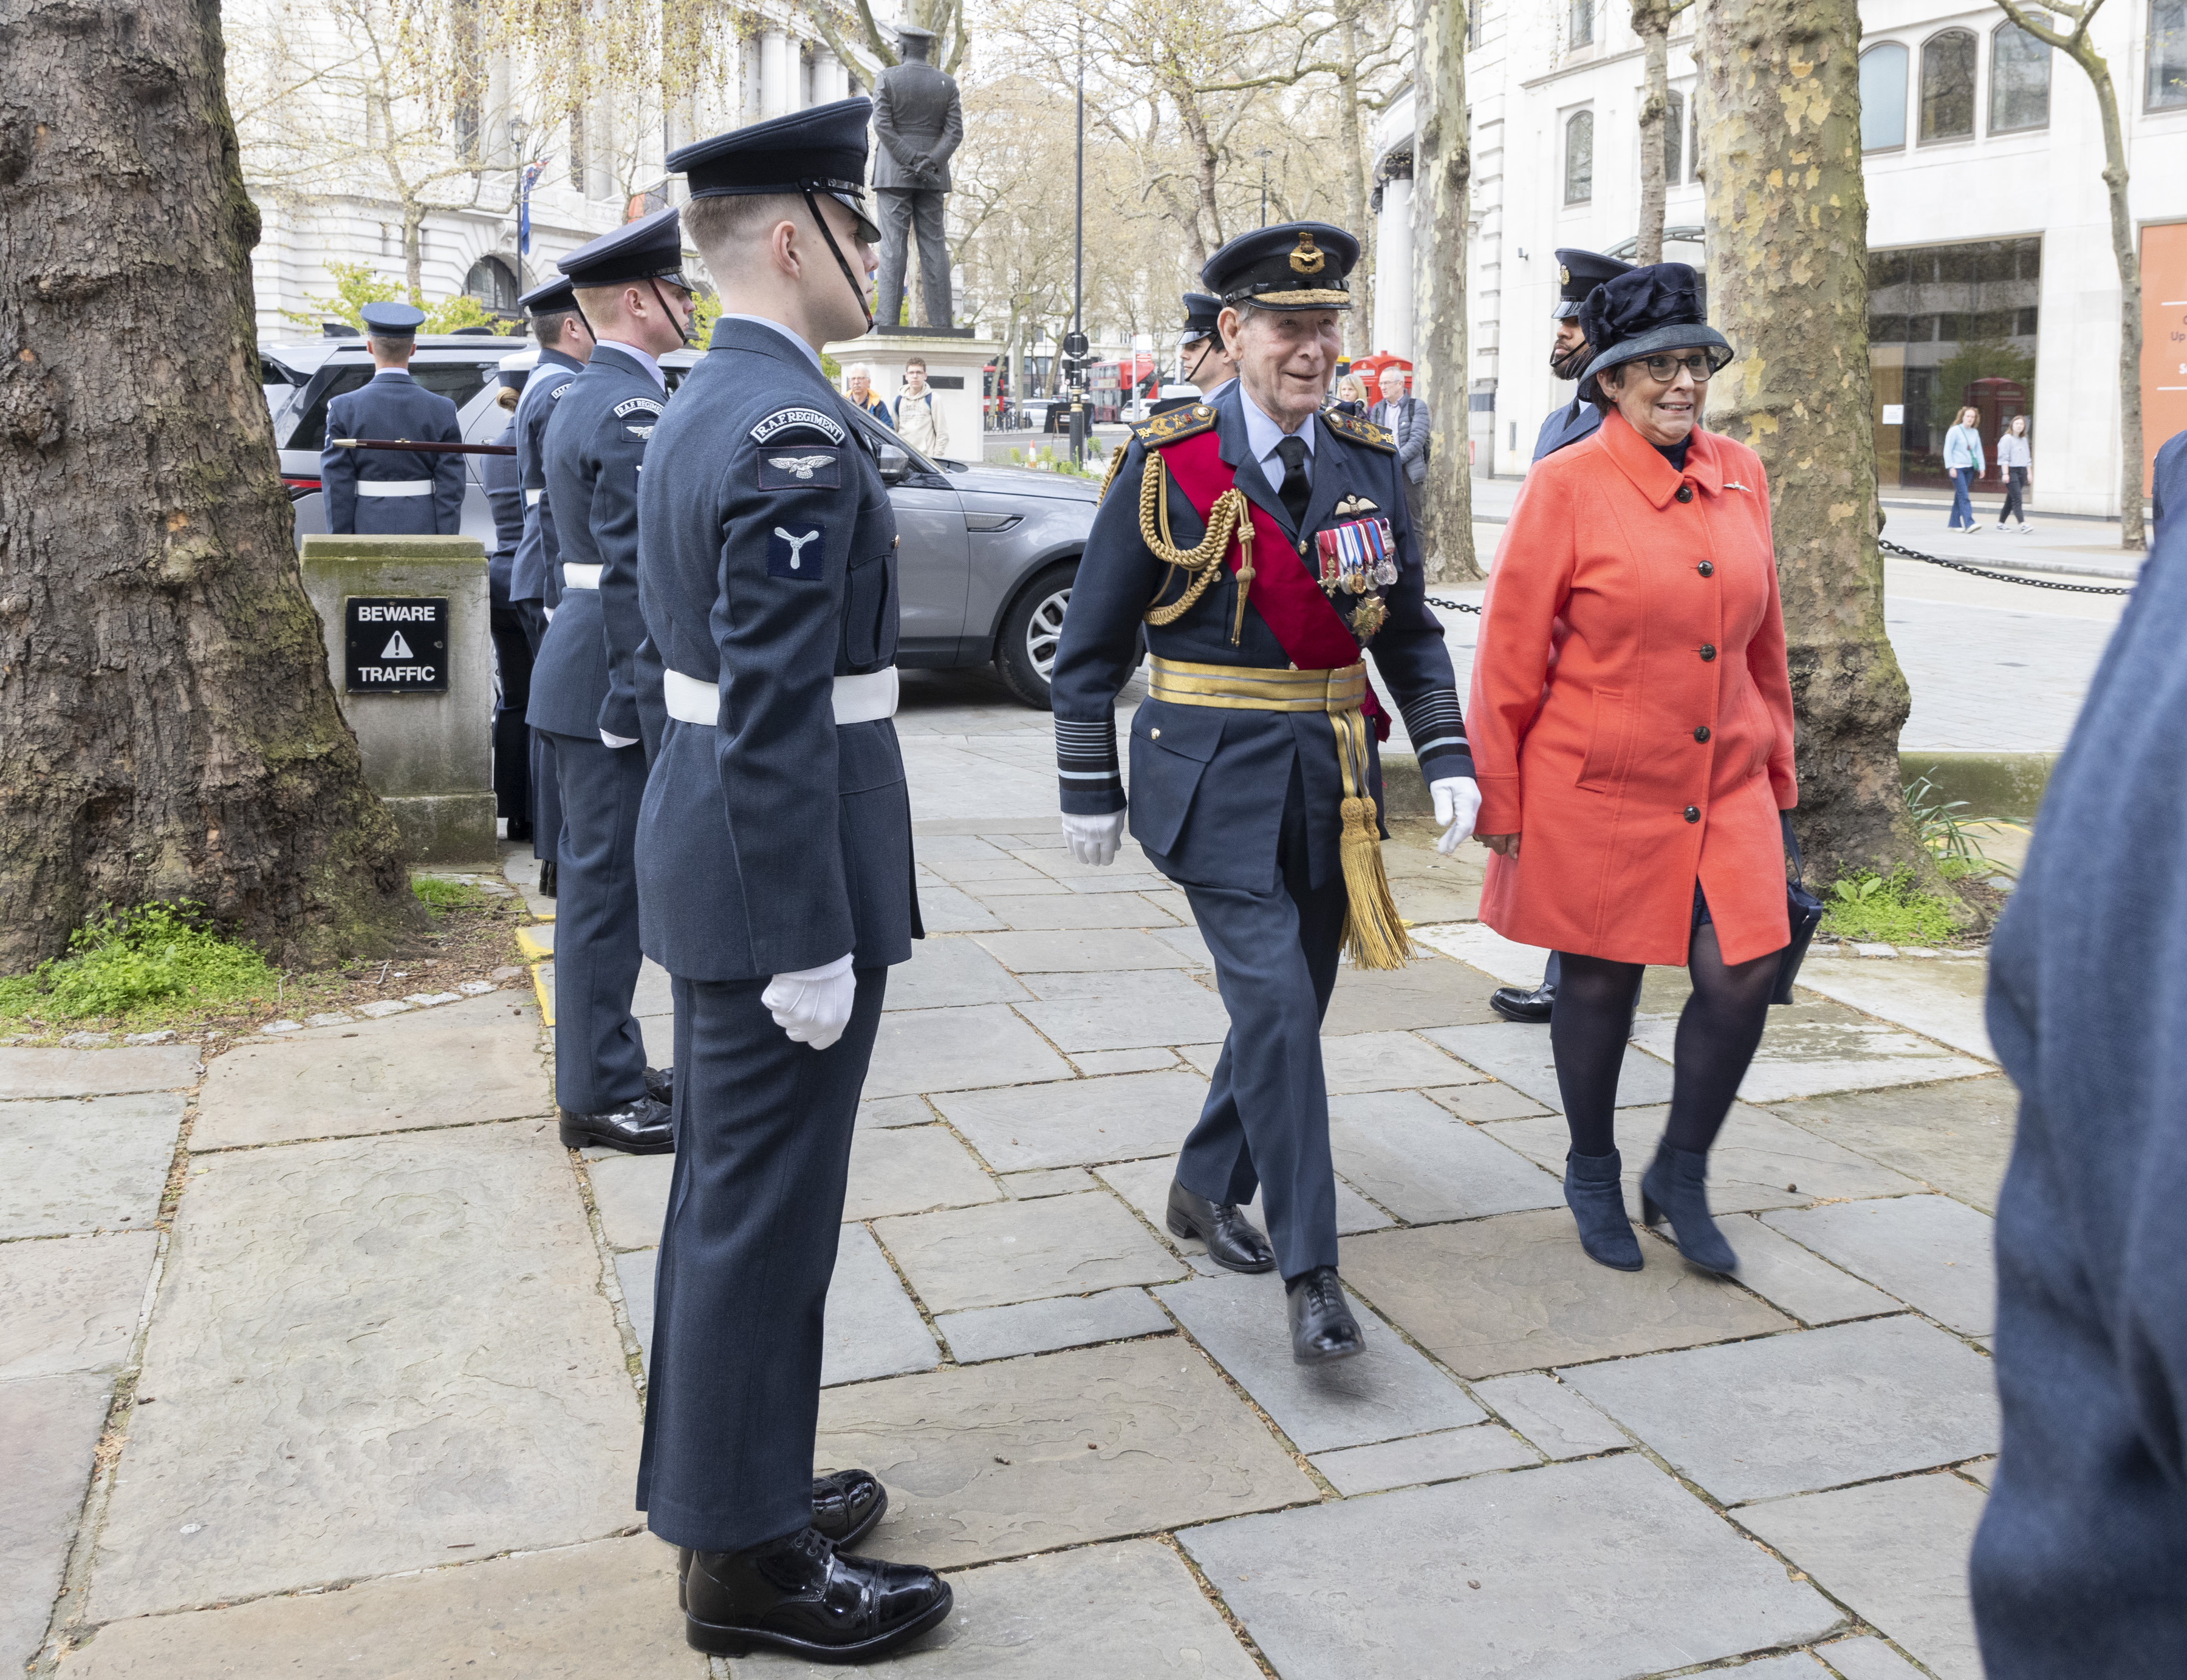 Image shows Personnel walking between RAF personnel in the street.